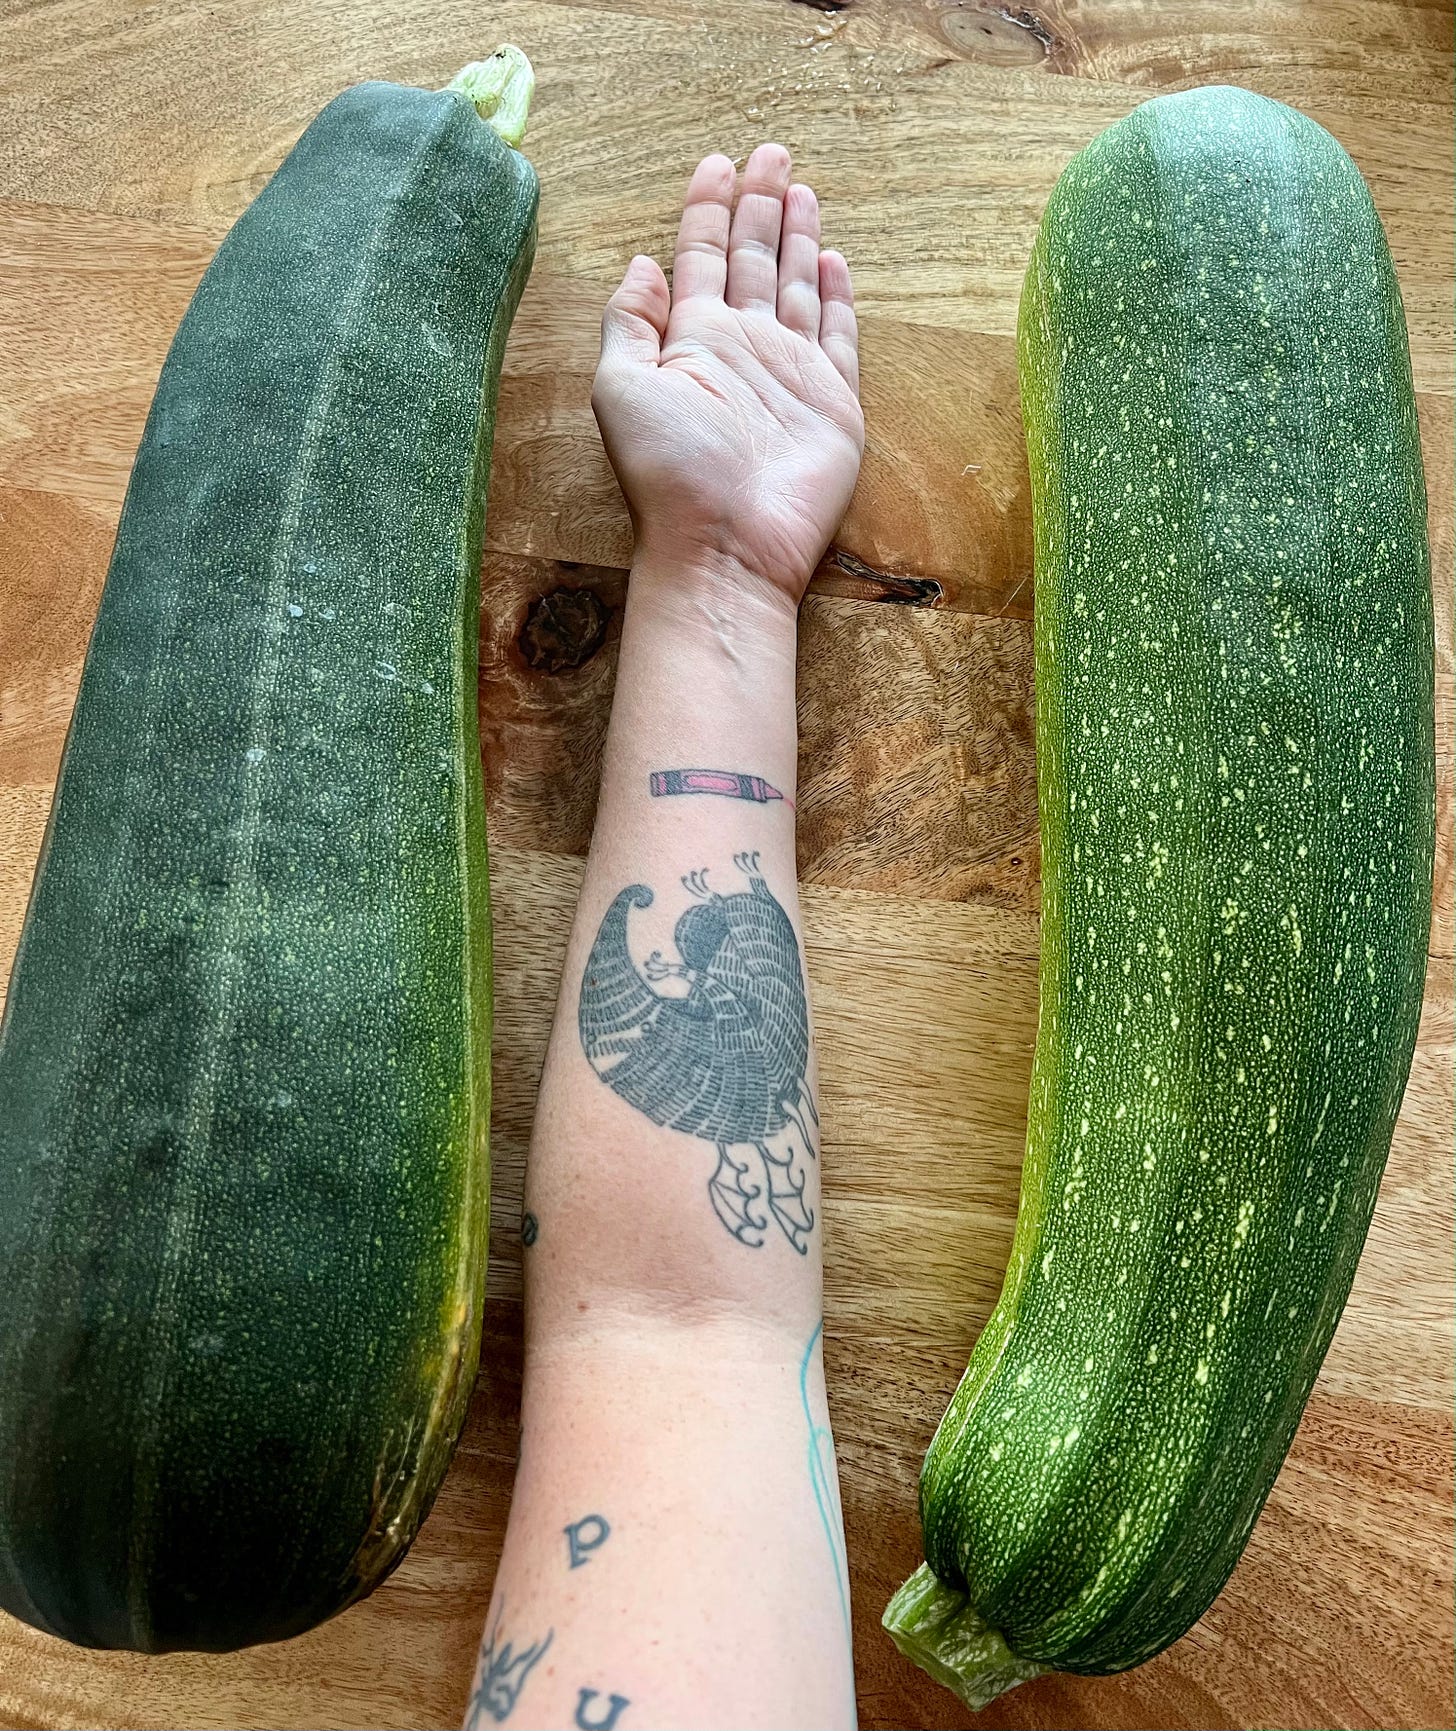 Photo of Jen's tattooed arm in between two very large zucchini.